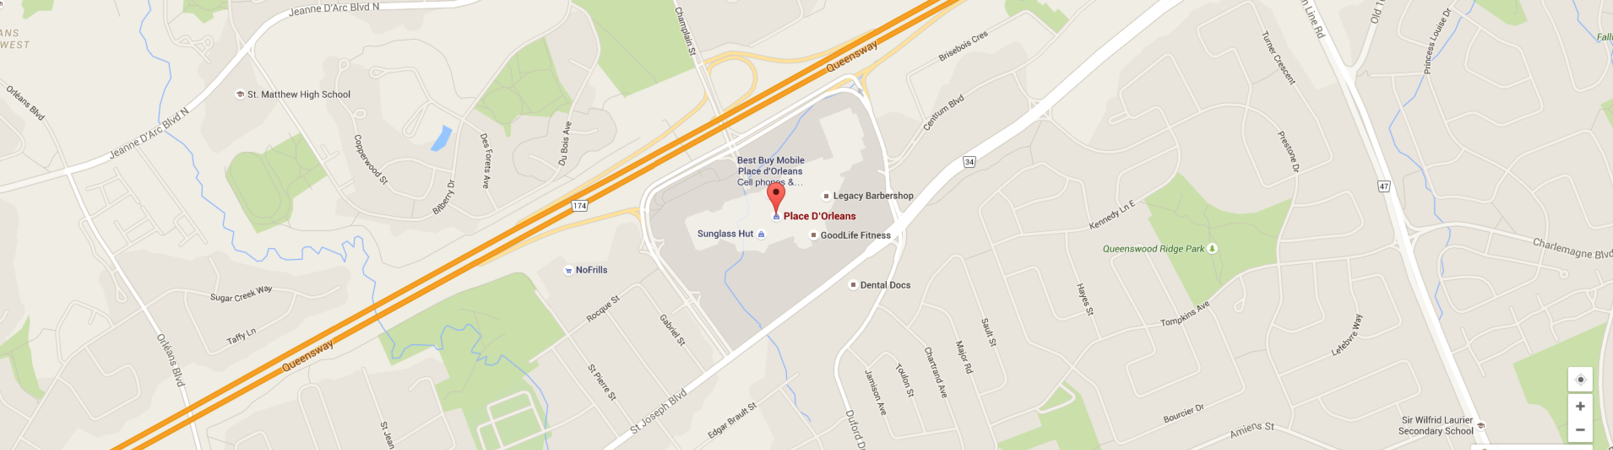 Place Dental Location in Orleans on Map | Place Dental